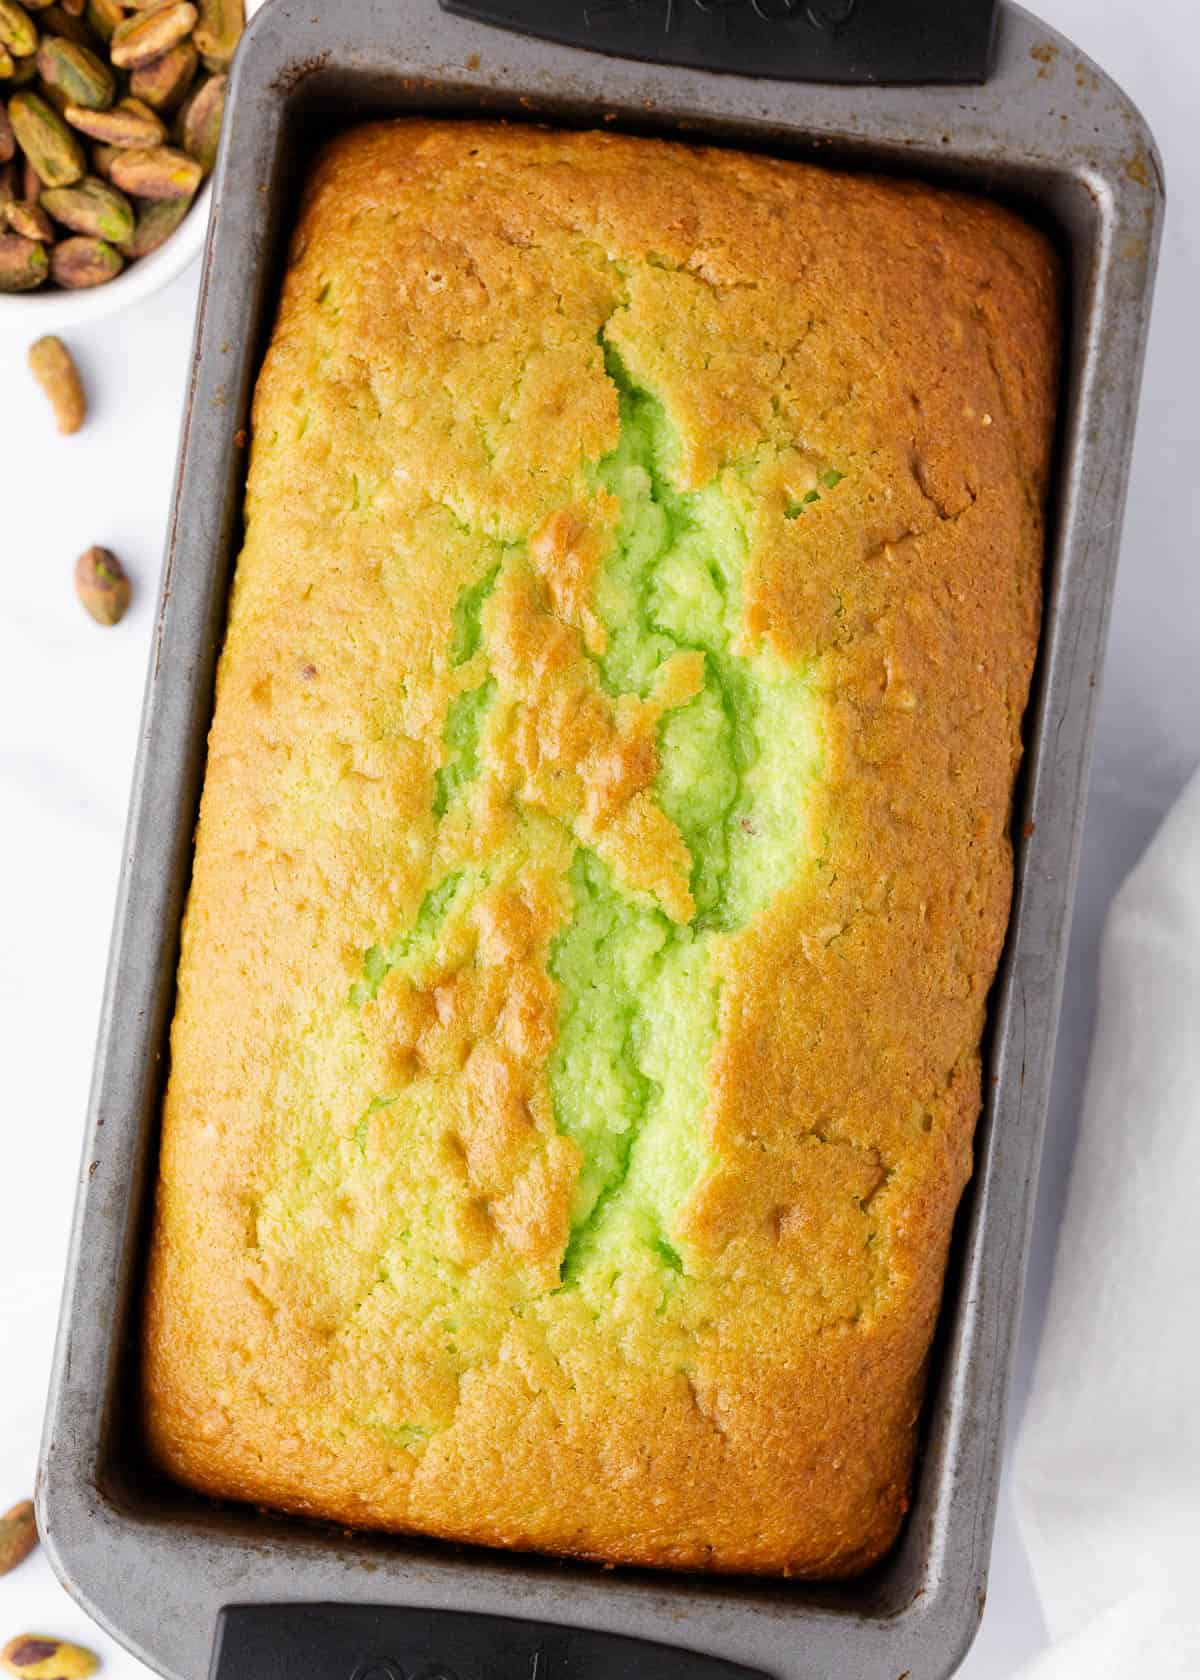 Pistachio bread in a loaf pan.